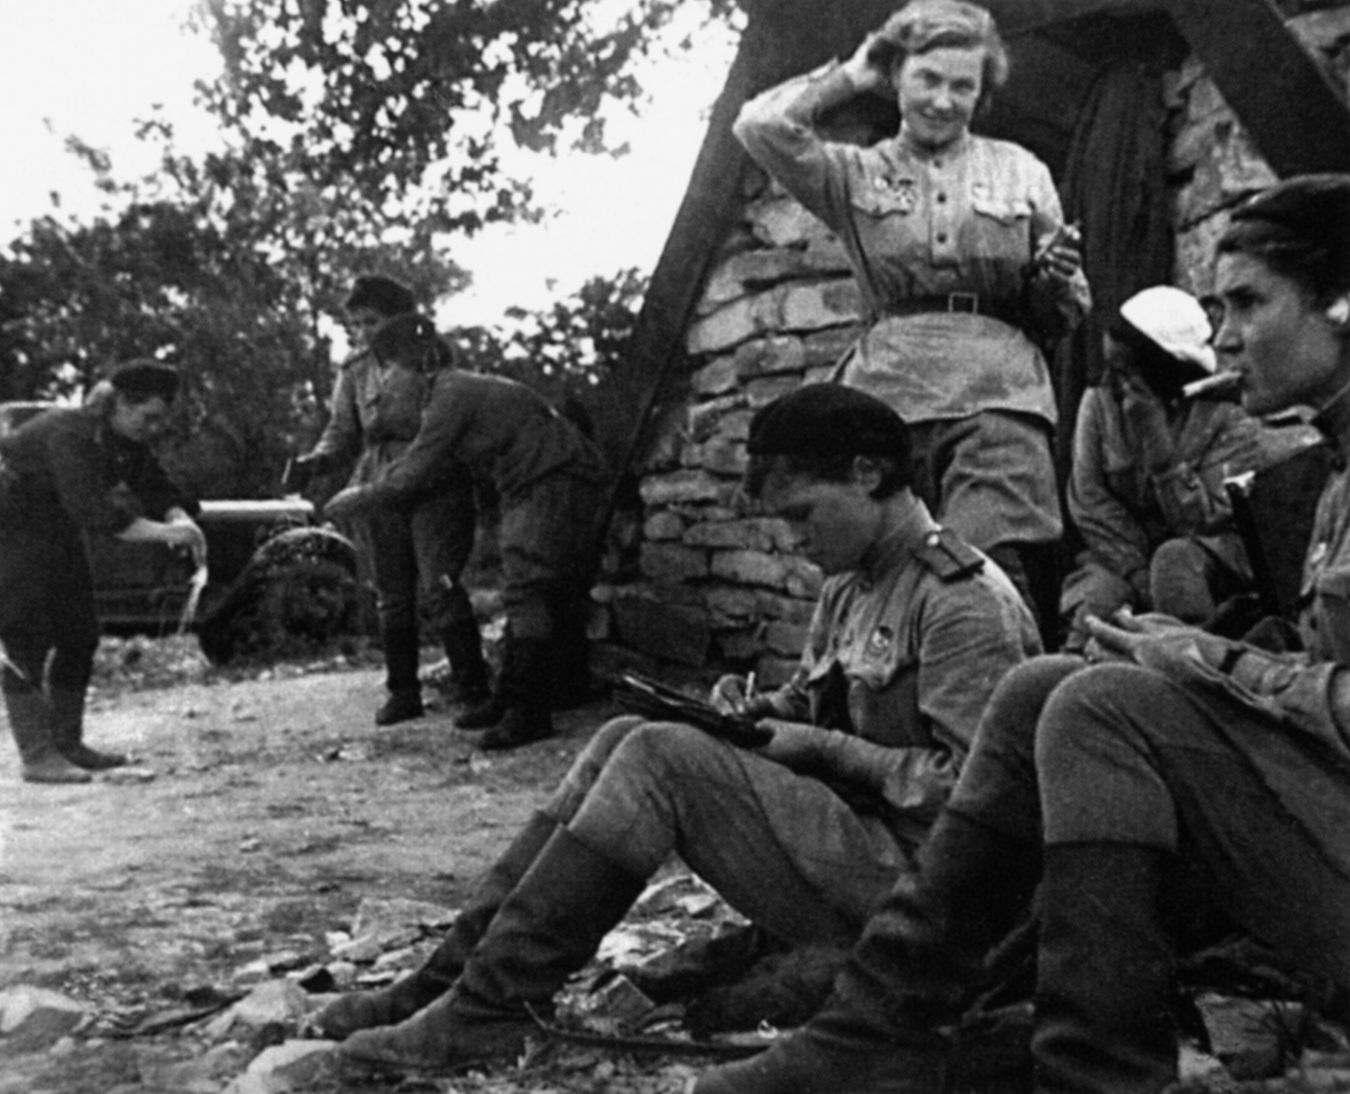 Pilots of Pe-2 bombers with the 125th Guards Day Bomber Regiment relax between missions as they await orders to take to the air once again. Several Night Witches received prestigious Soviet military decorations for their service.